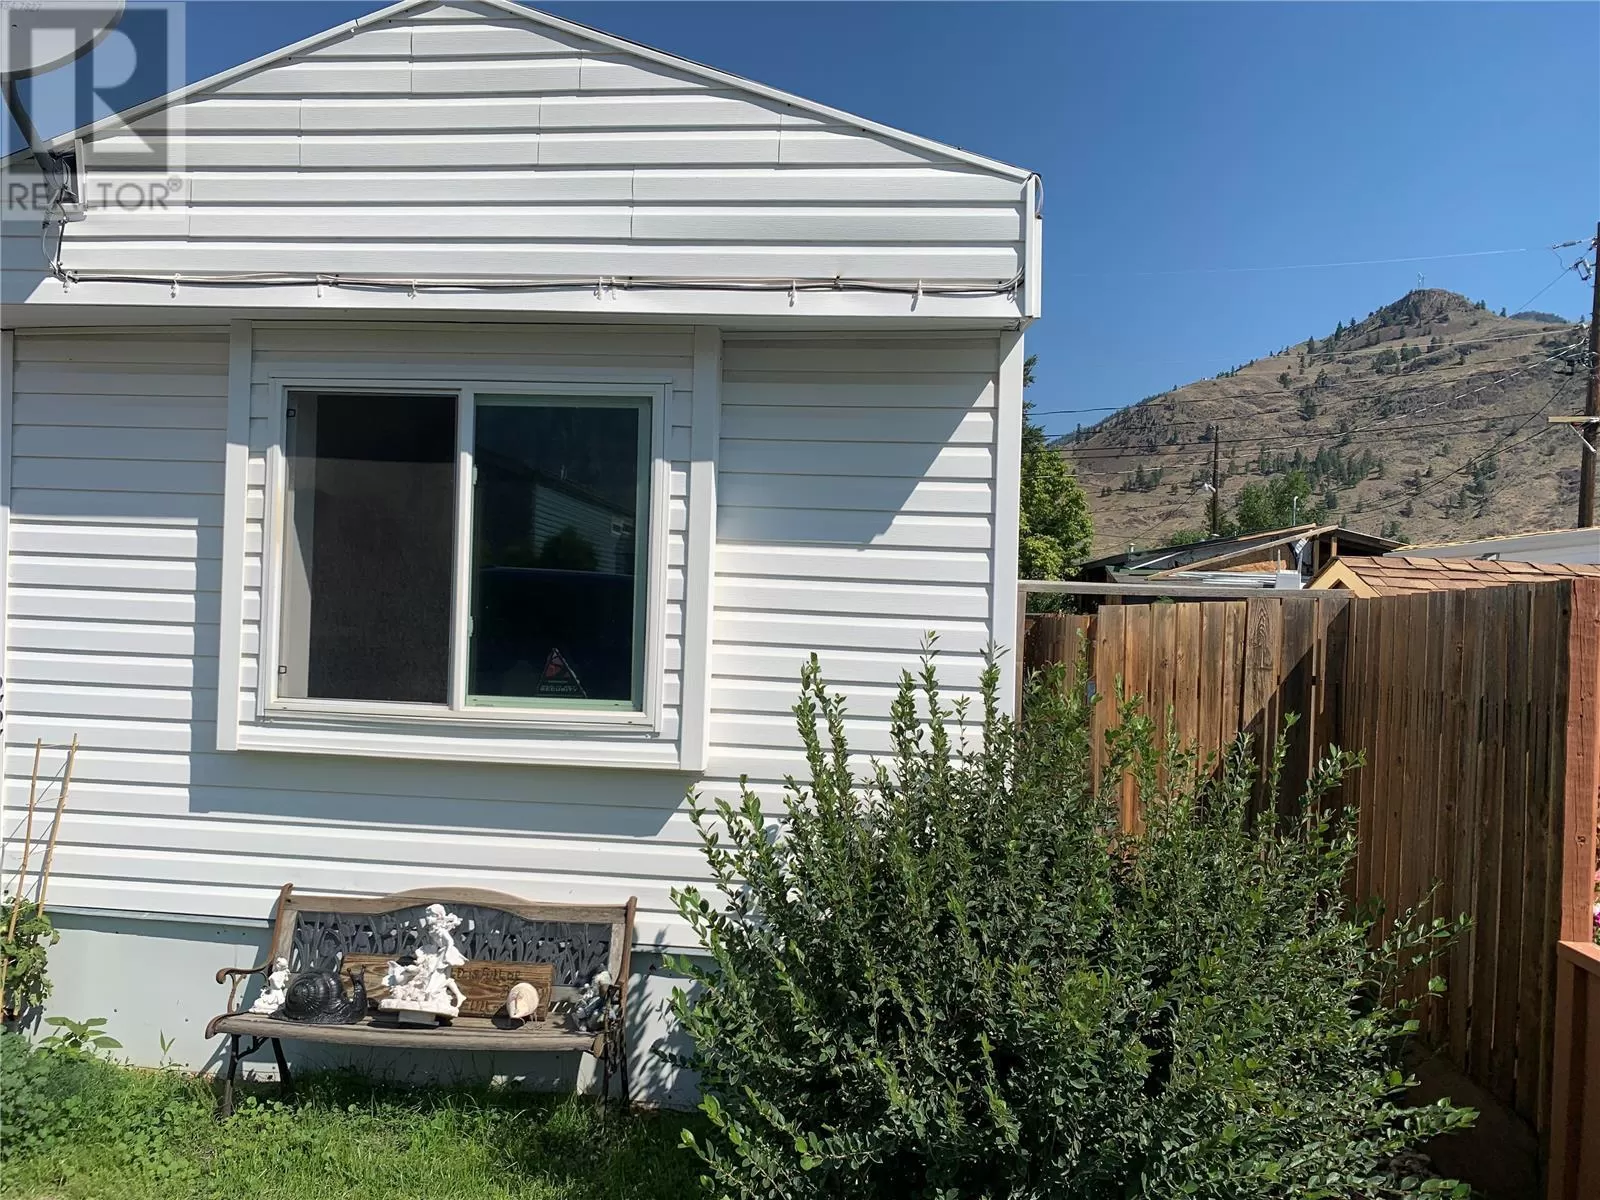 Manufactured Home for rent: 31 Hwy 3a Unit# 22, Keremeos, British Columbia V0X 1N2